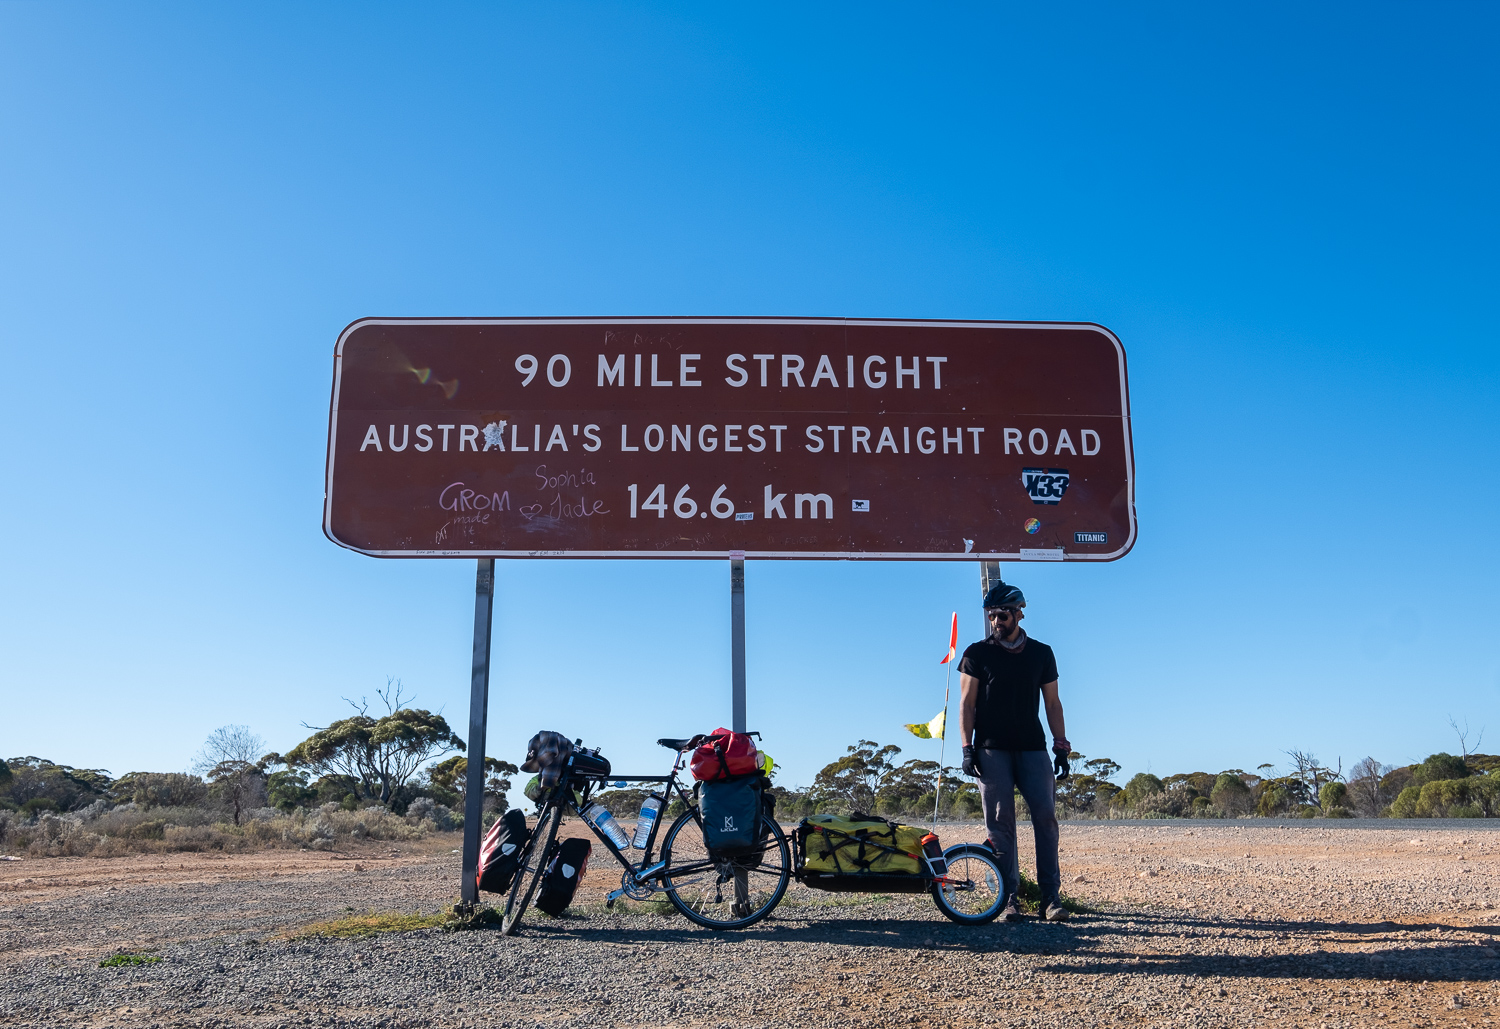  A popular photo spot.     The section between Balladonia and Caiguna  includes what is regarded as the longest straight stretch of road in Australia and one of the longest in the world. The road stretches for 146.6 kilometres (91.1 mi) without turni